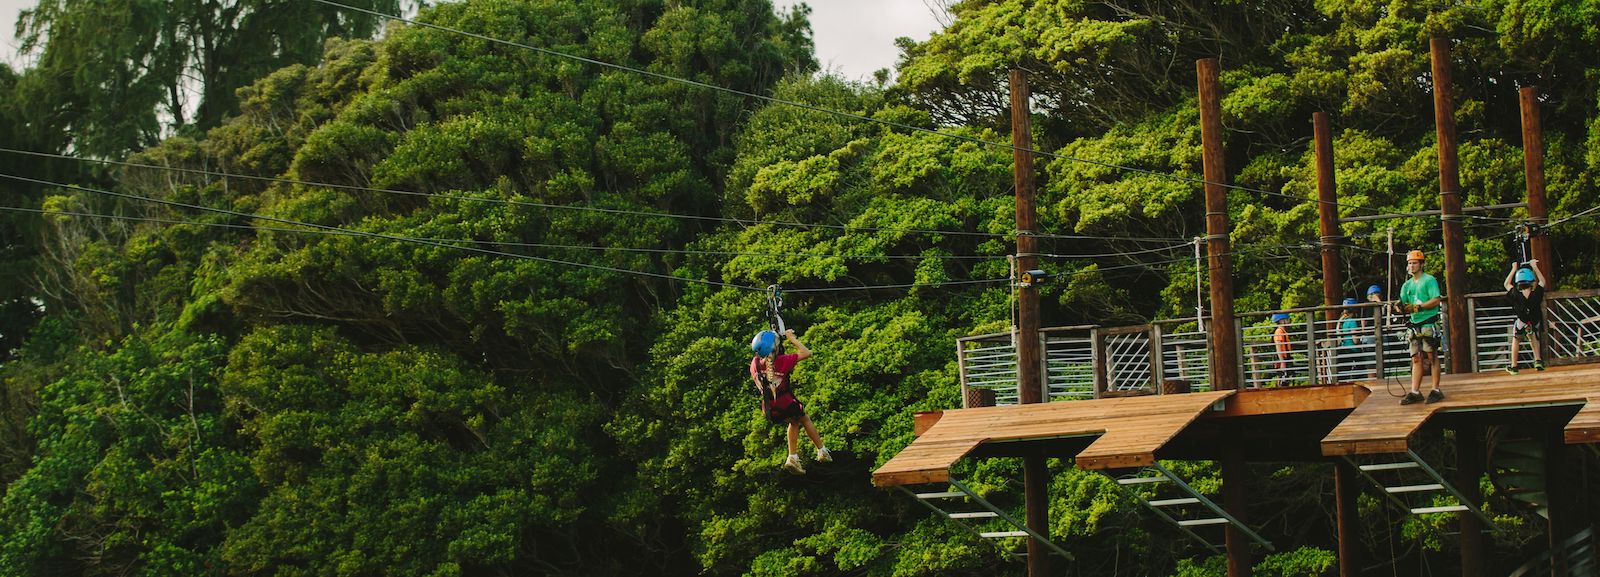 5 of the Best Things to Do in Oahu with Kids That Are Lots of Fun